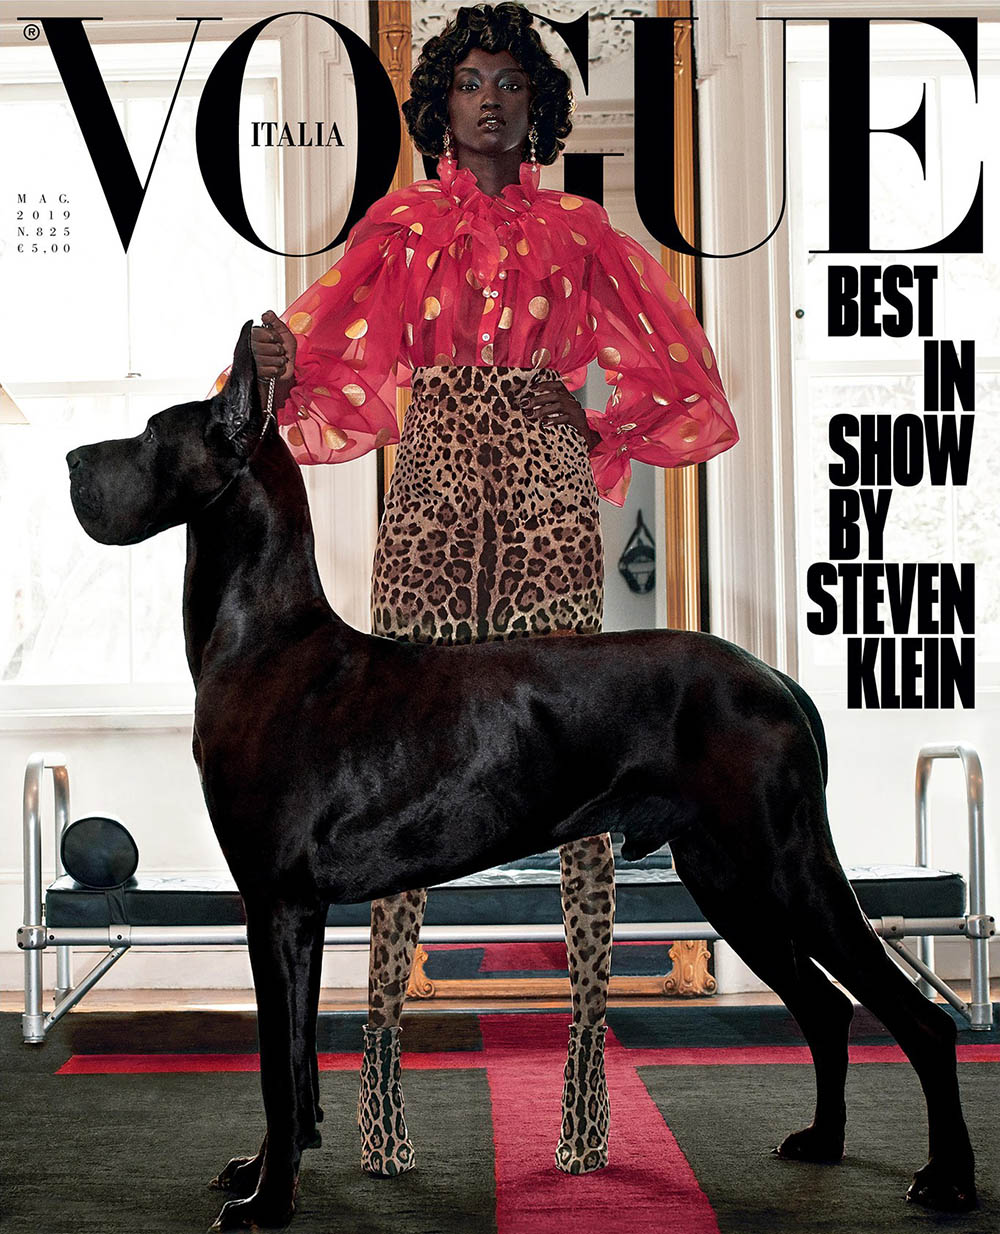 Anok Yai covers Vogue Italia May 2019 by Steven Klein